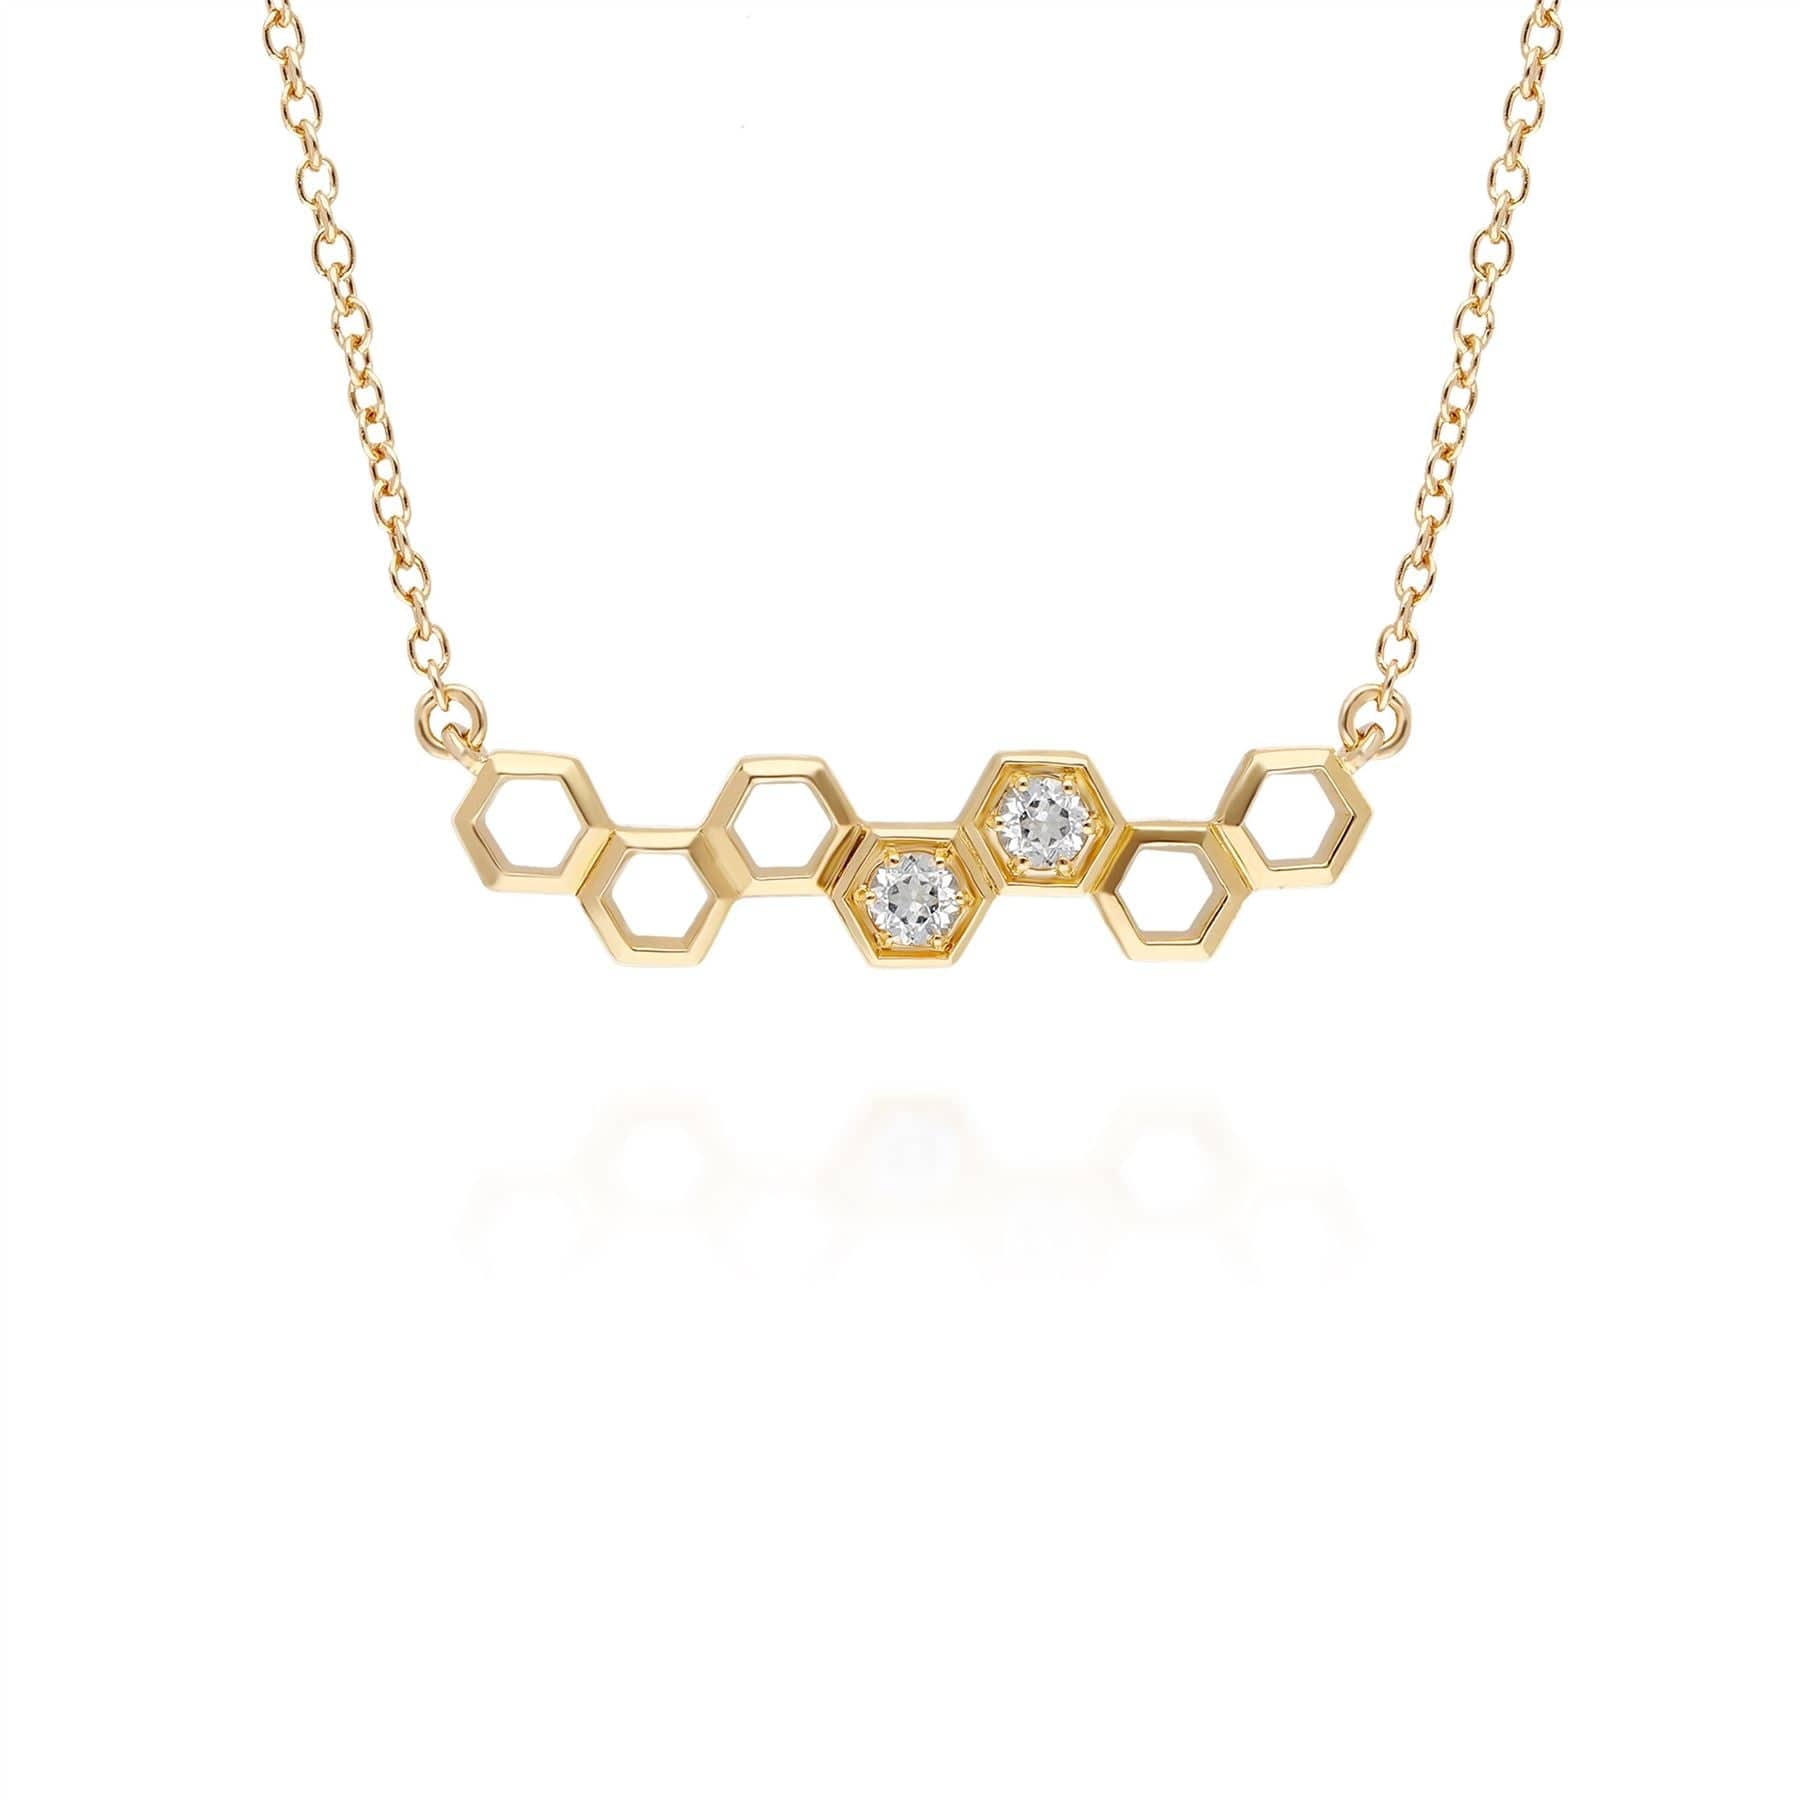 Honeycomb Inspired White Topaz Link Necklace in 9ct Gold - Gemondo